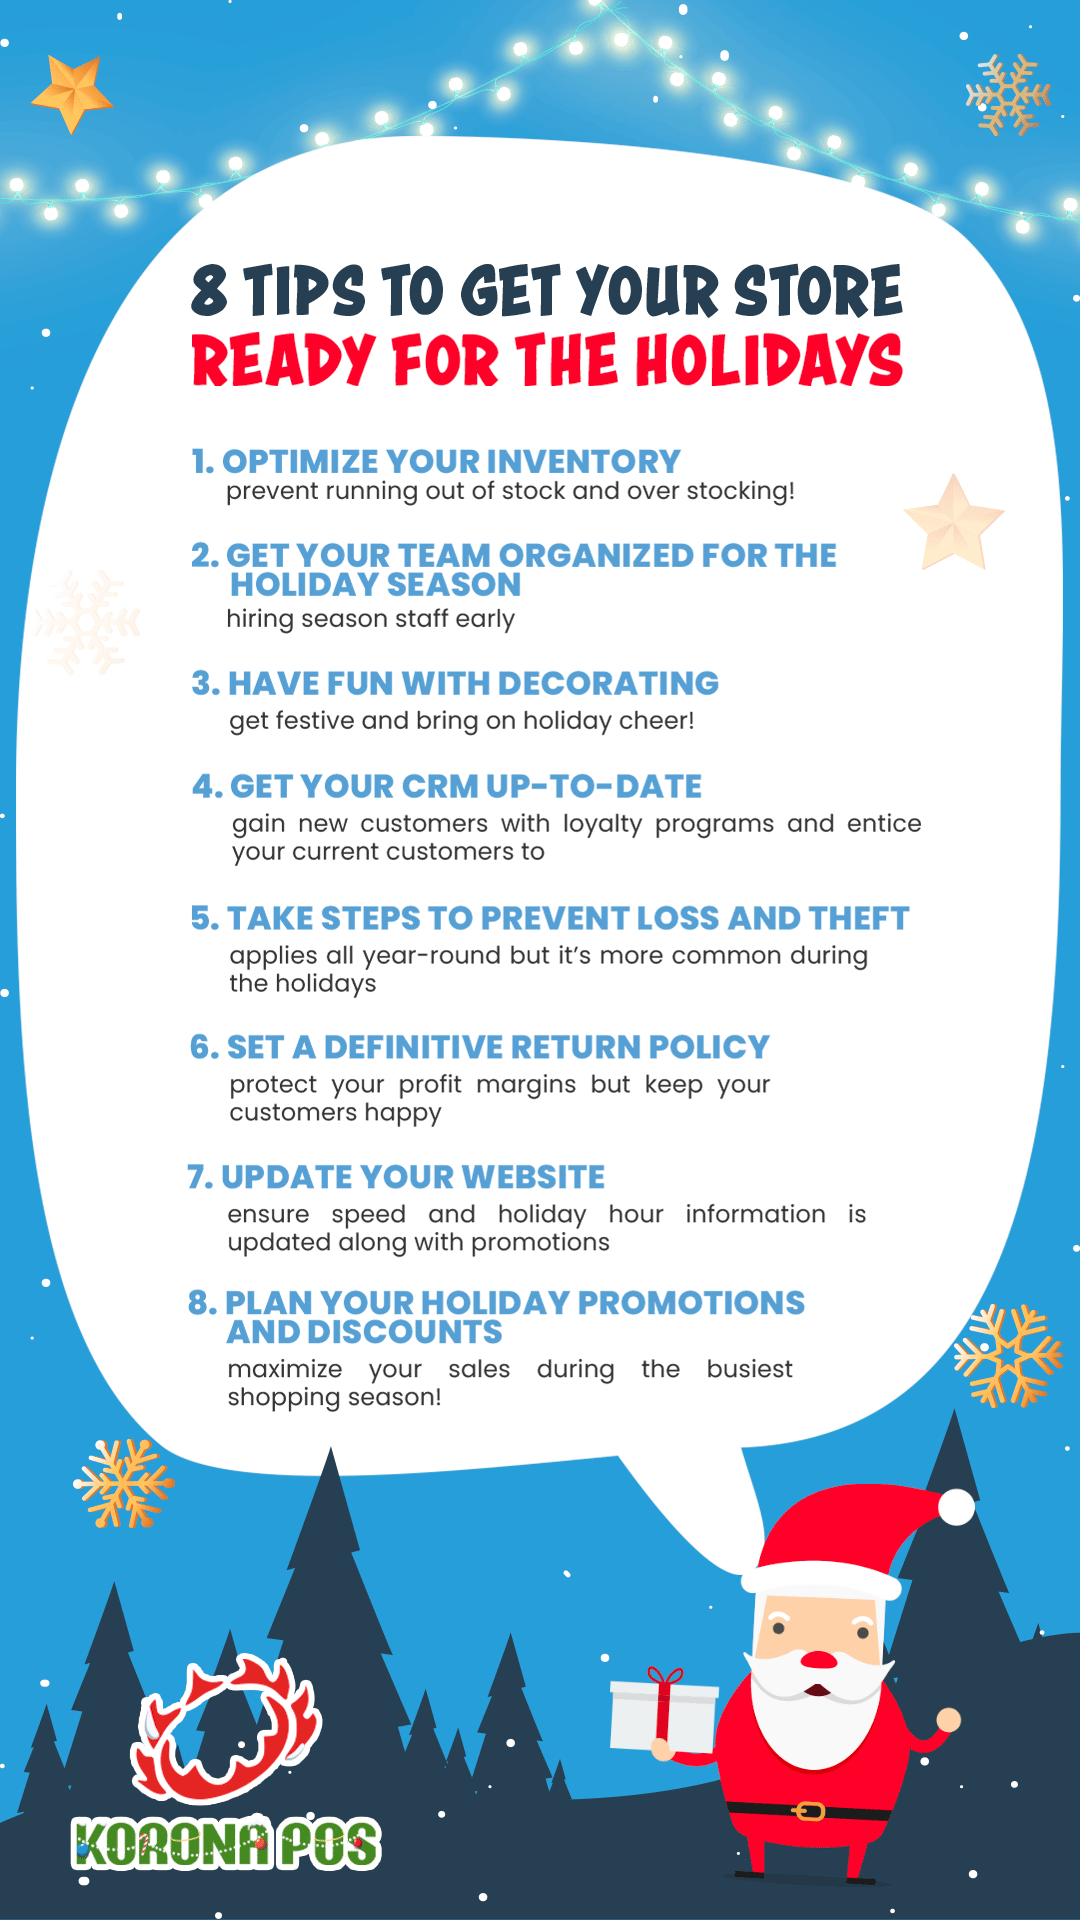 8 Tips to get your store ready for the holidays.